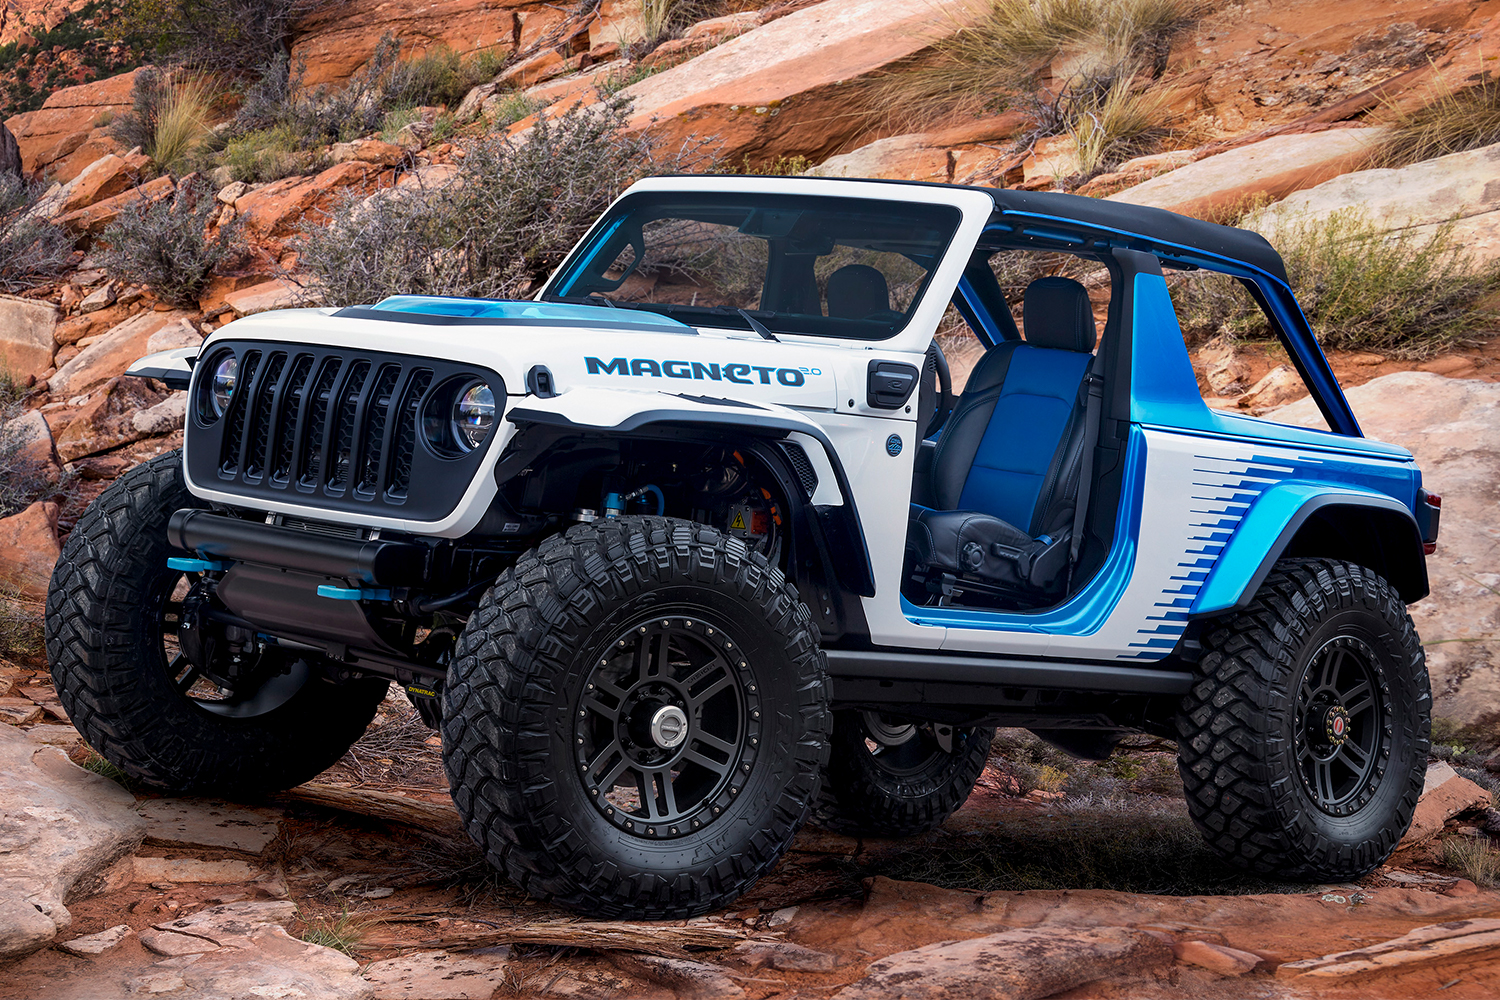 The Jeep Magneto 2.0, an electric Jeep Wrangler with a stick shift that debuted at Easter Jeep Safari 2022.